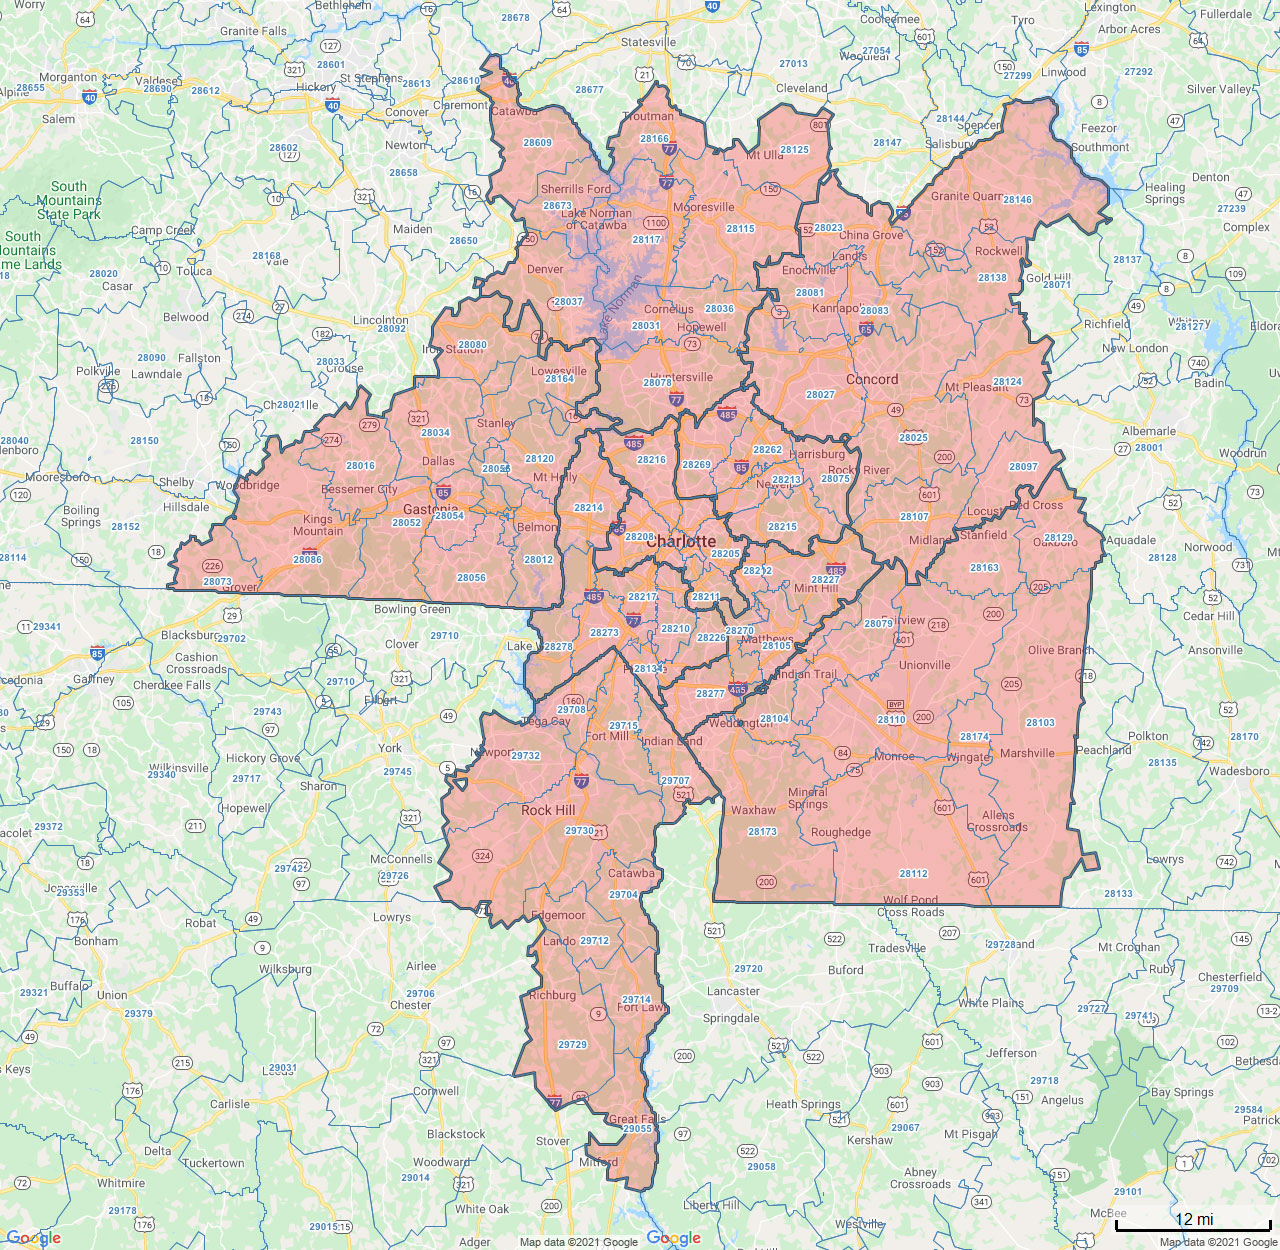 All Dry Services Area Coverage Map for Greater Charlotte, NC